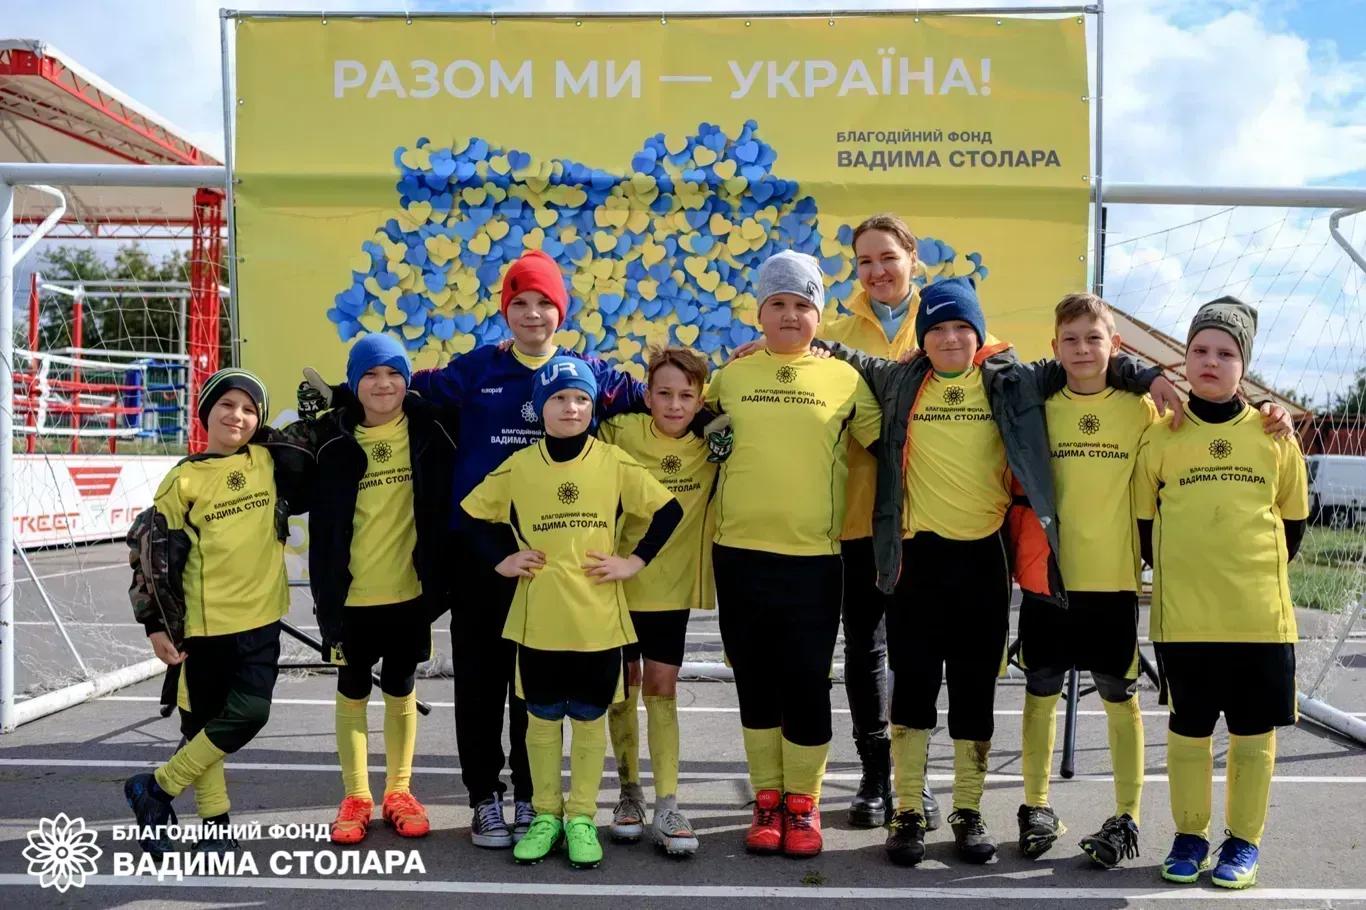 We did it! The football tournament among children's teams of the Kyiv region has been held!